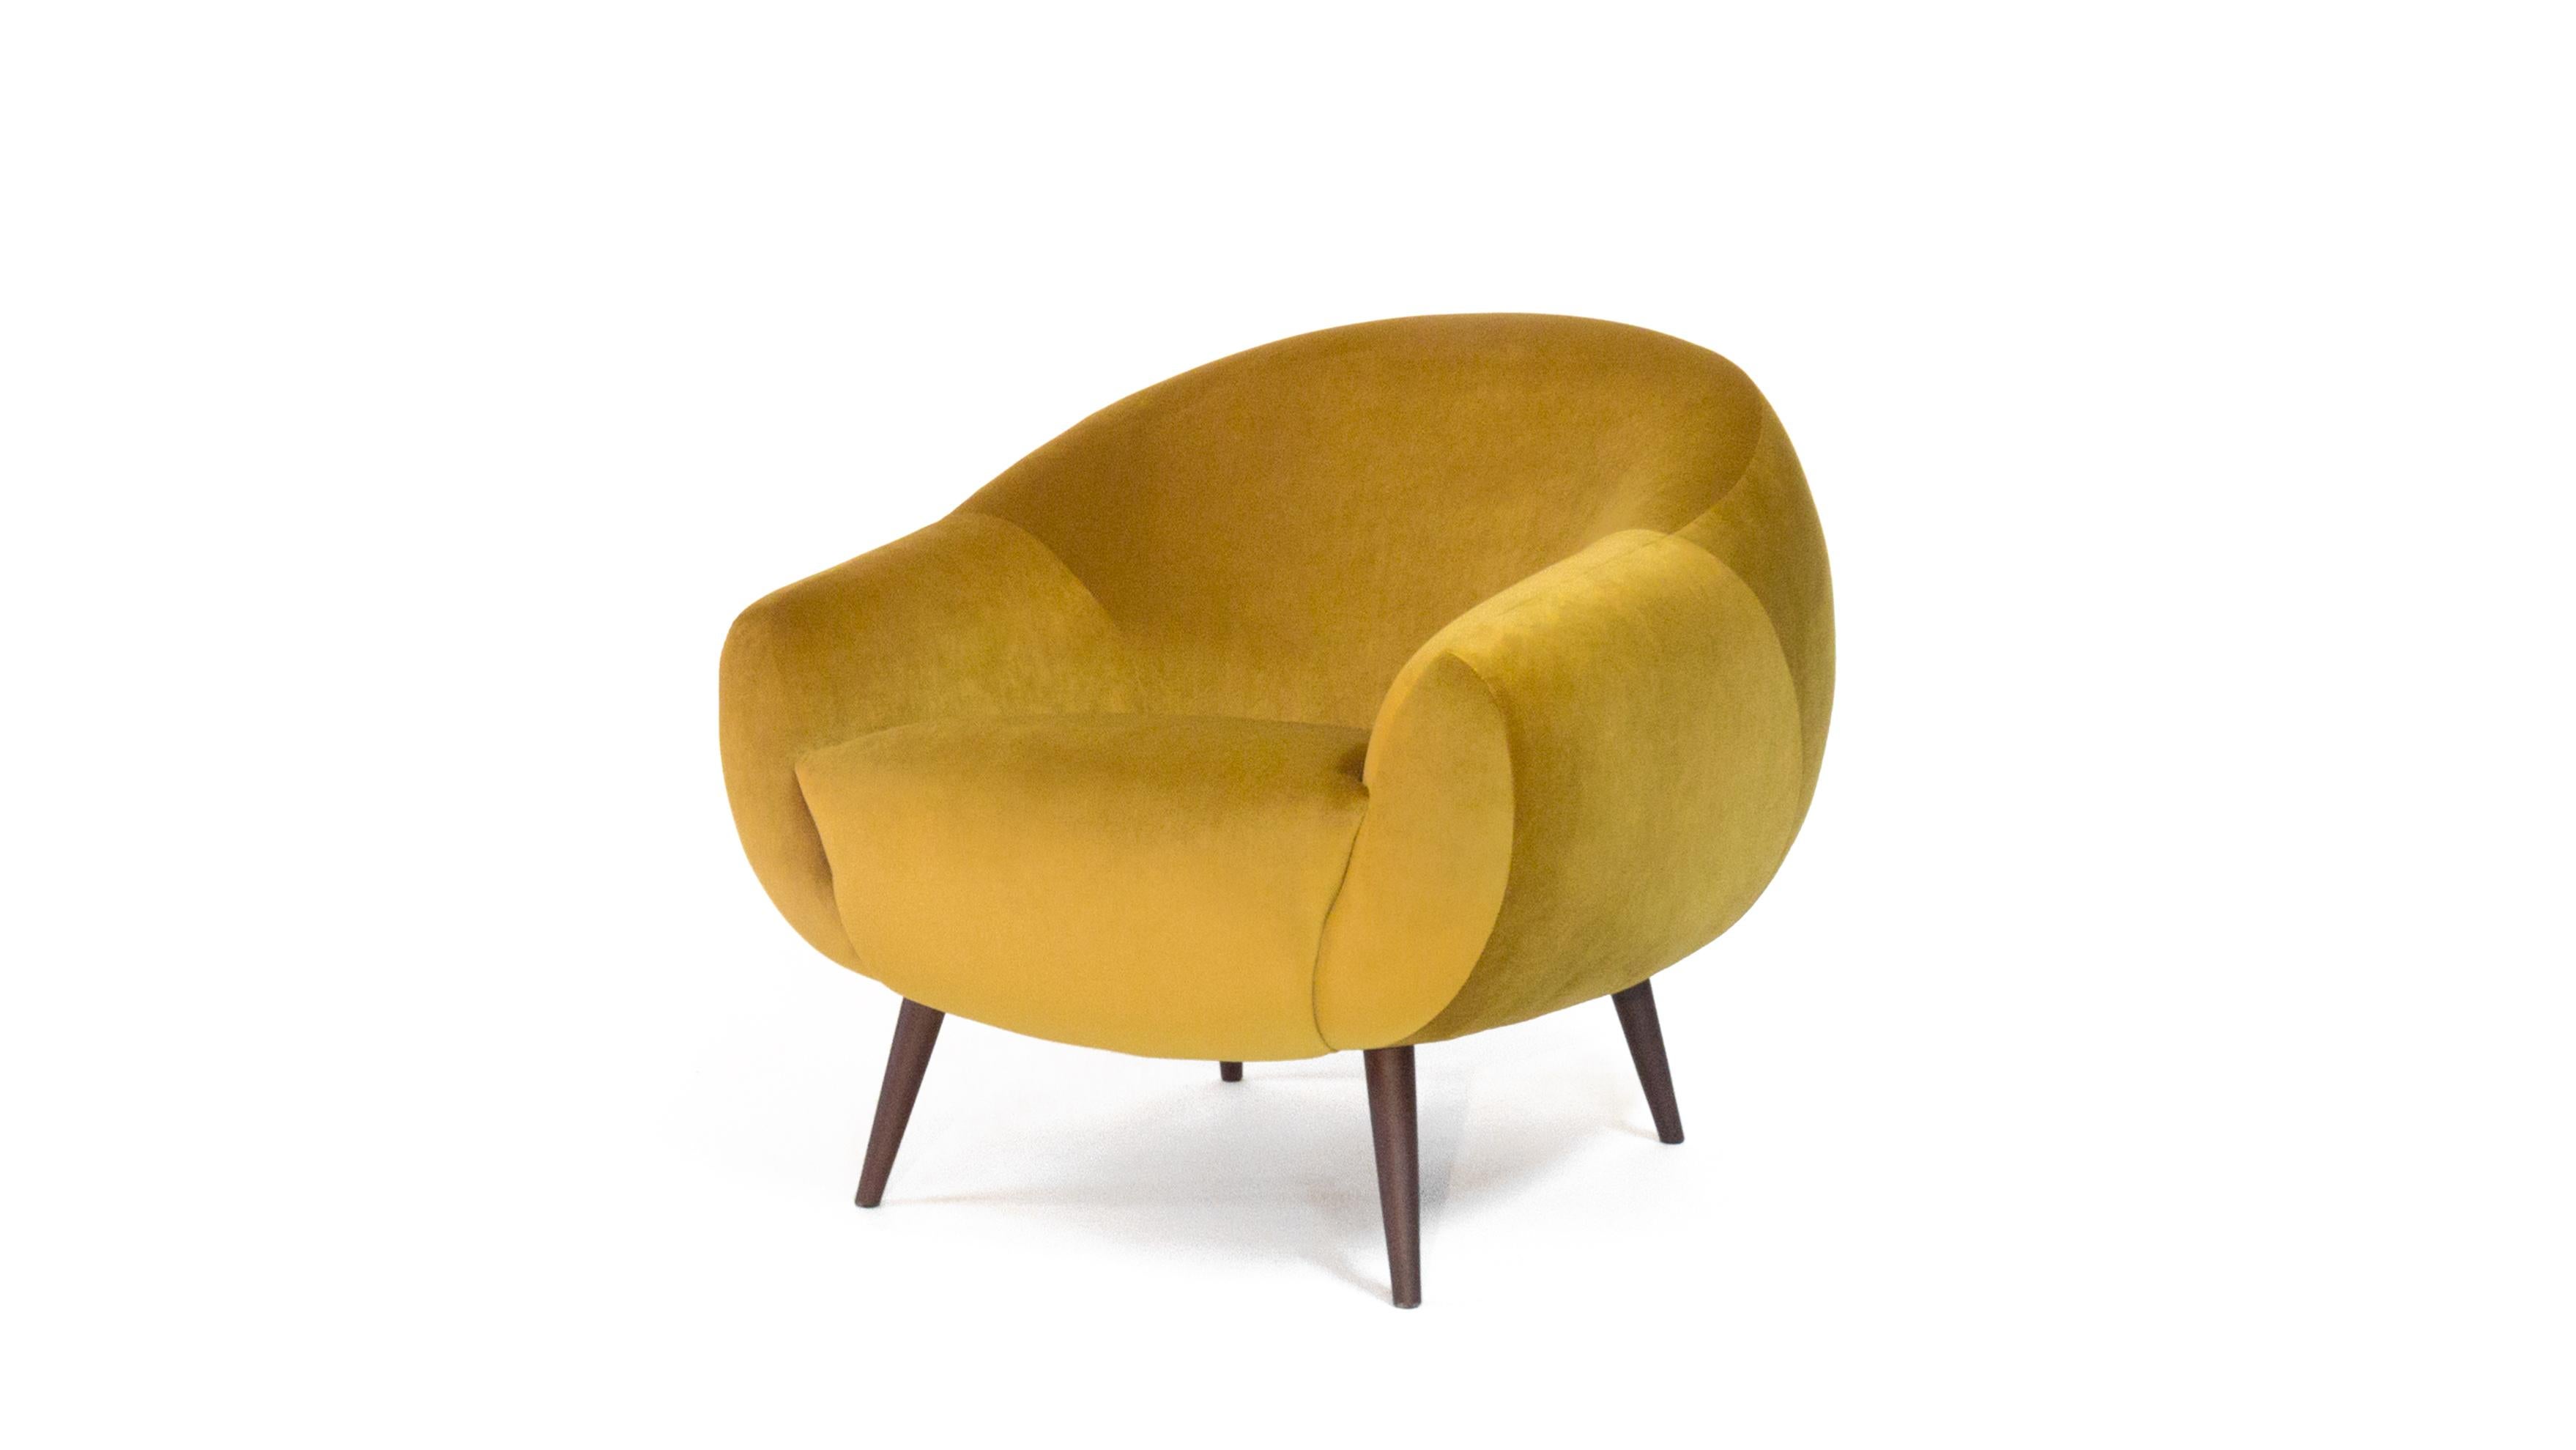 The rounded lines of this early 1950s style armchair are influenced by the 